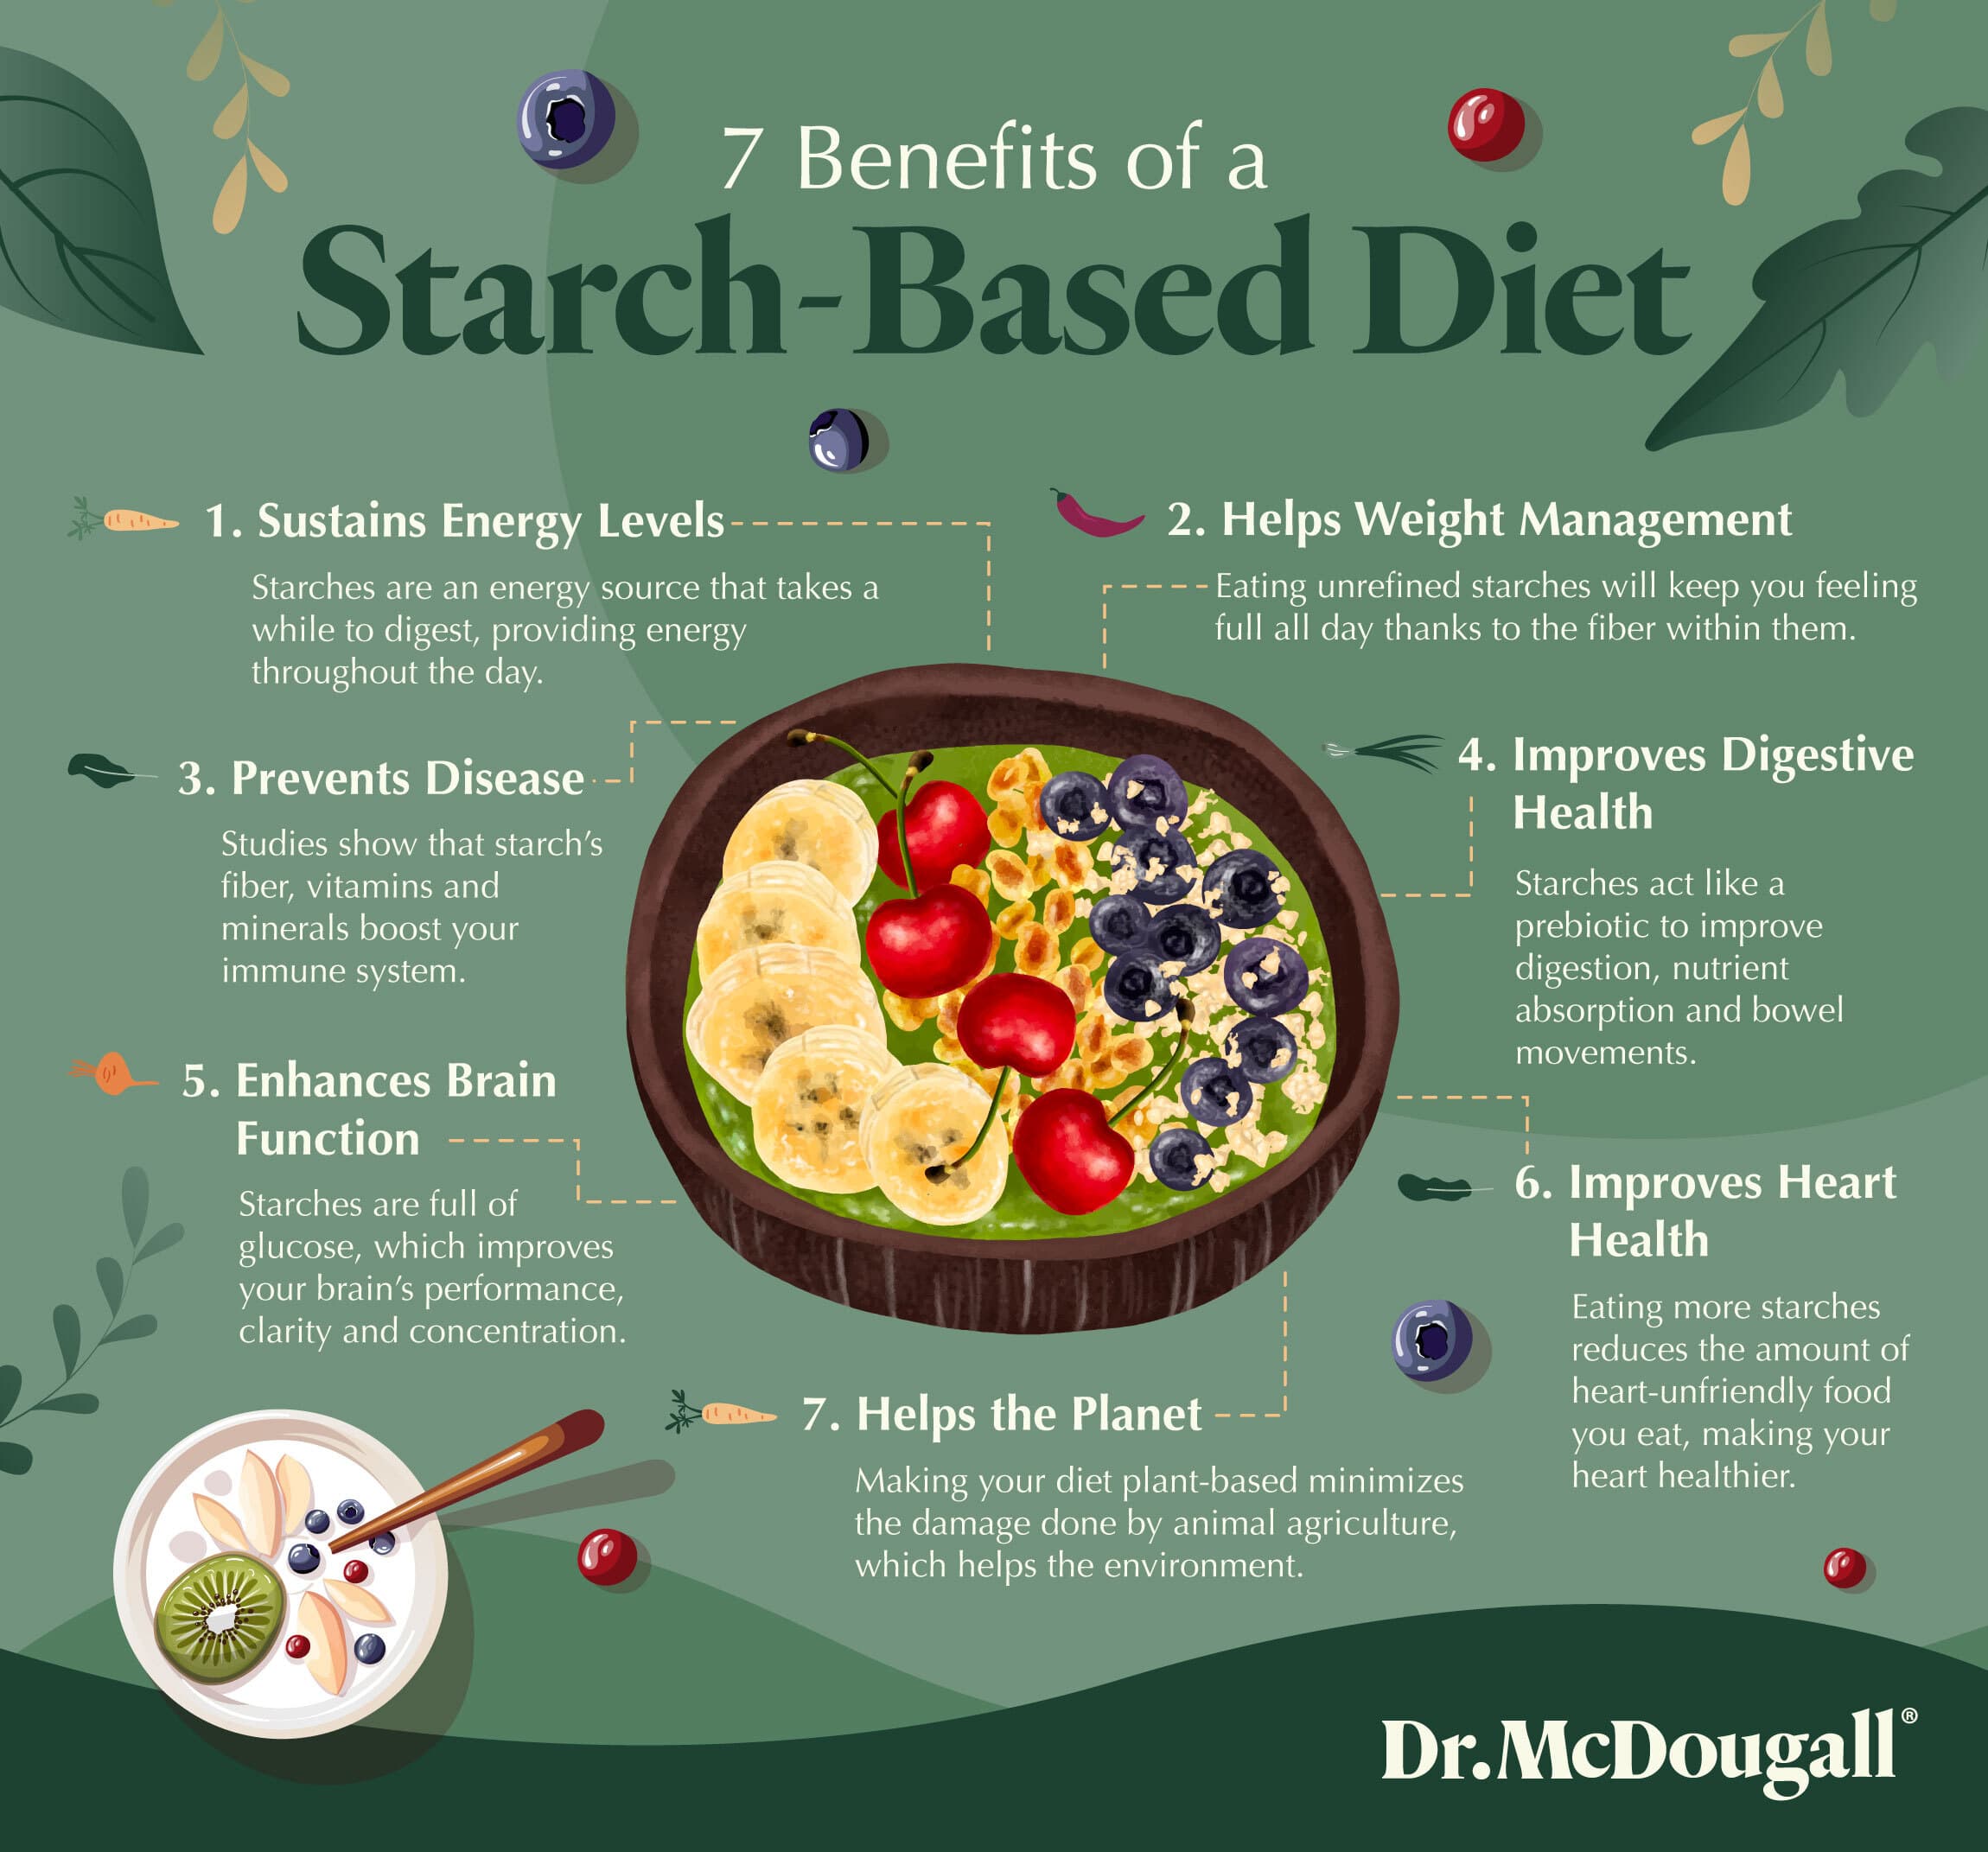 7 Benefits of Starch-Based Diet